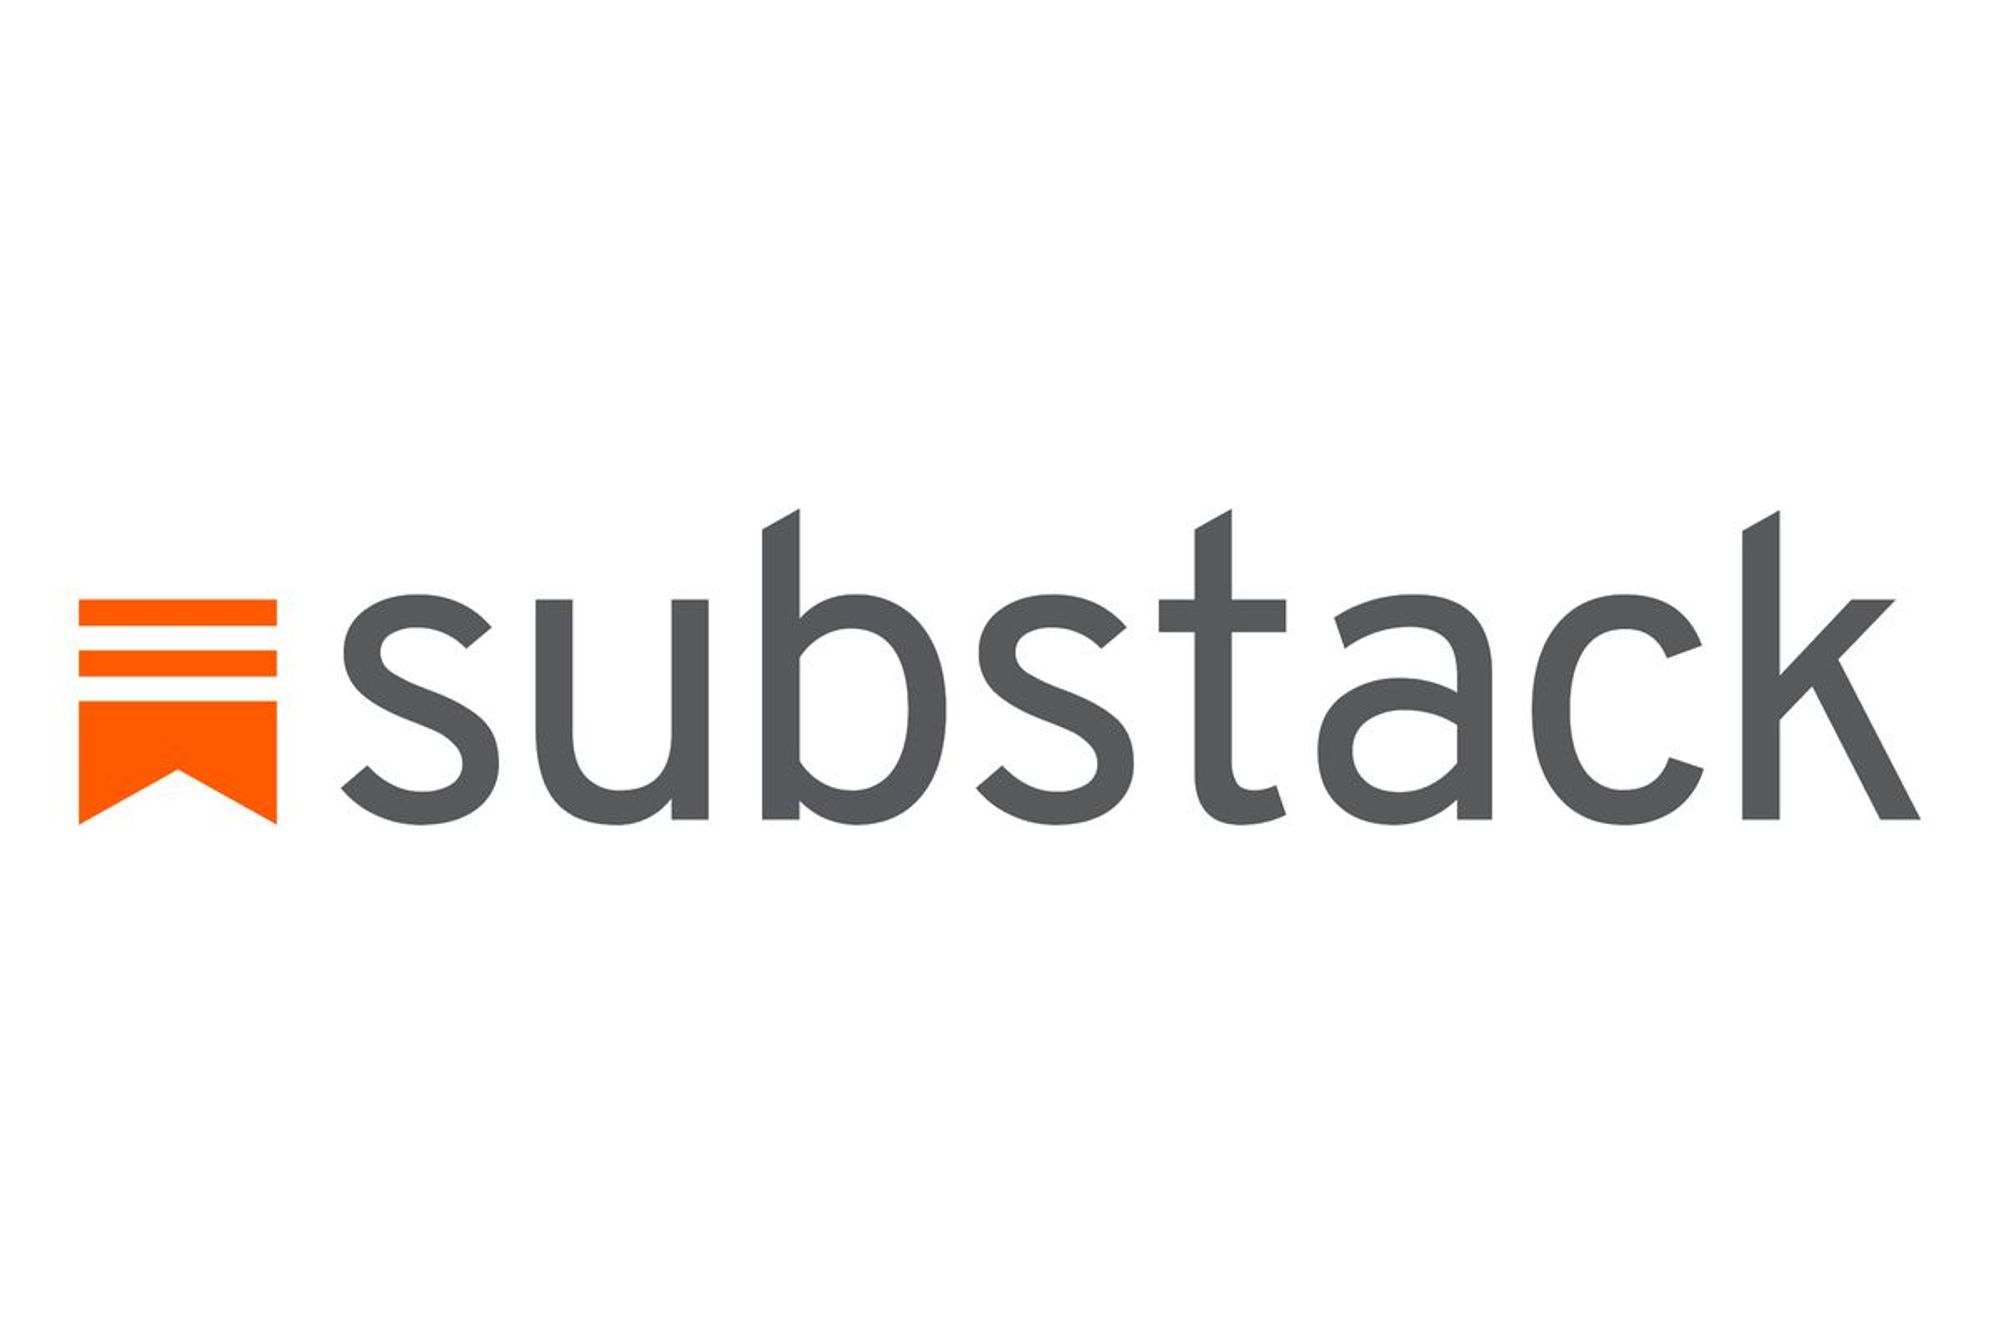 Our Company Substack